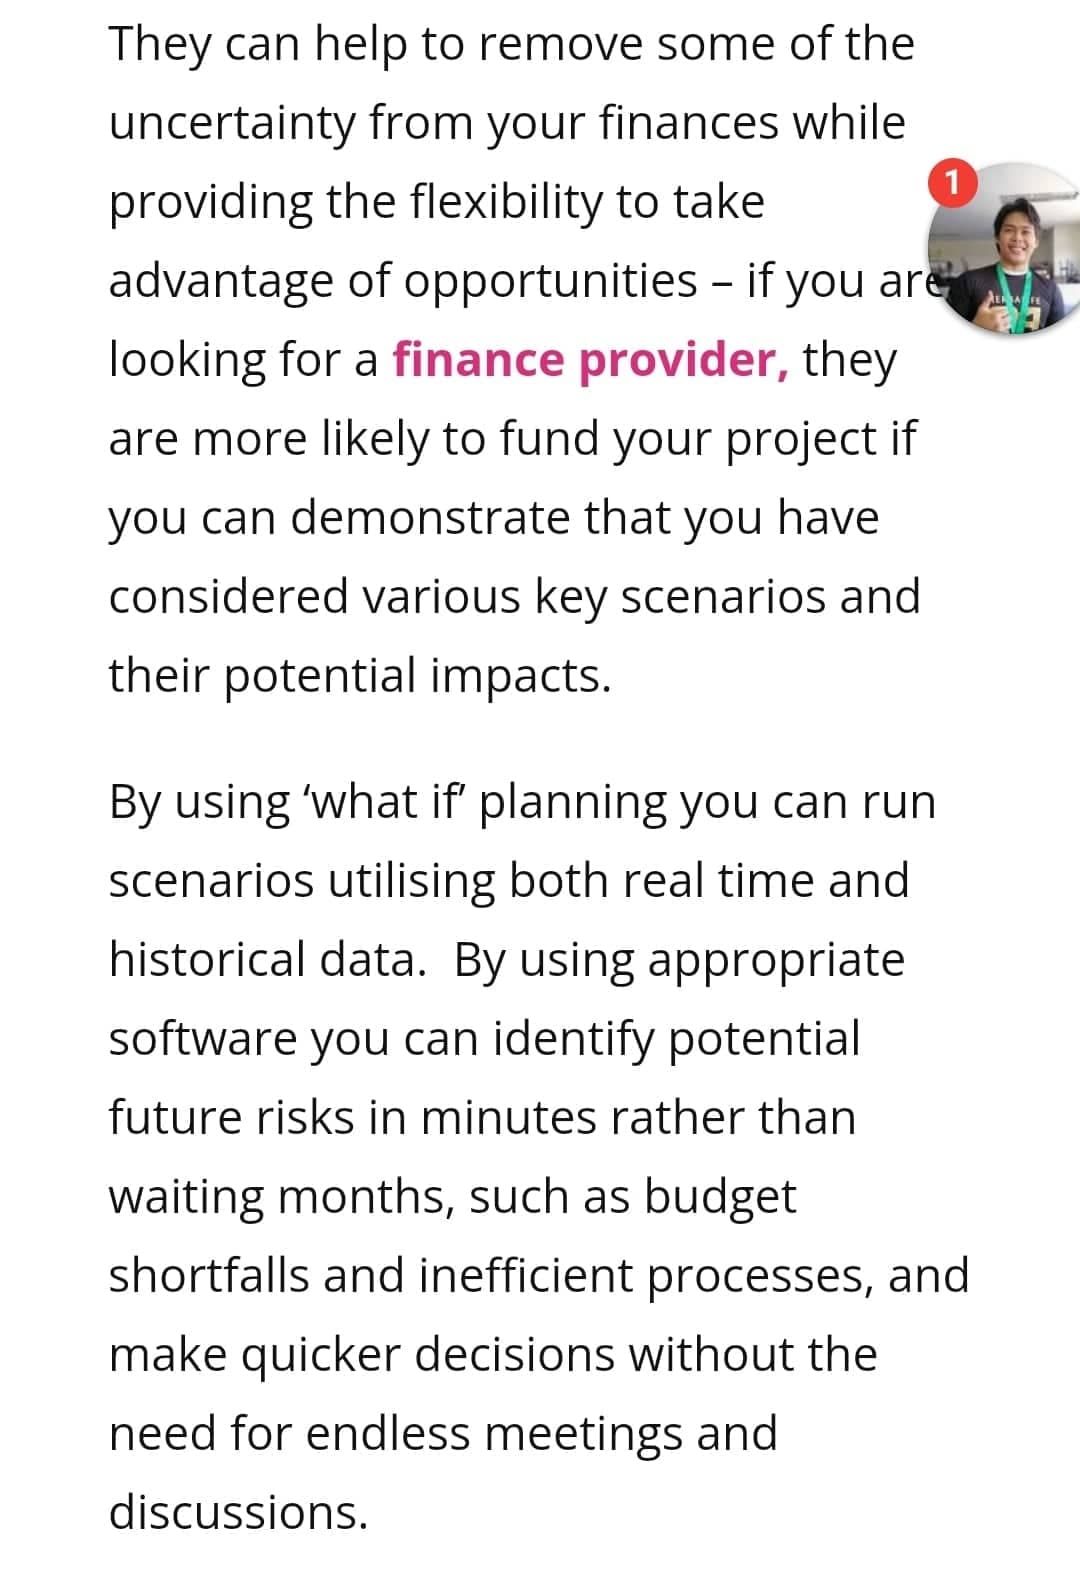 They can help to remove some of the
uncertainty from your finances while
1
providing the flexibility to take
advantage of opportunities - if you are
looking for a finance provider, they
are more likely to fund your project if
you can demonstrate that you have
considered various key scenarios and
their potential impacts.
By using 'what if planning you can run
scenarios utilising both real time and
historical data. By using appropriate
software you can identify potential
future risks in minutes rather than
waiting months, such as budget
shortfalls and inefficient processes, and
make quicker decisions without the
need for endless meetings and
discussions.
